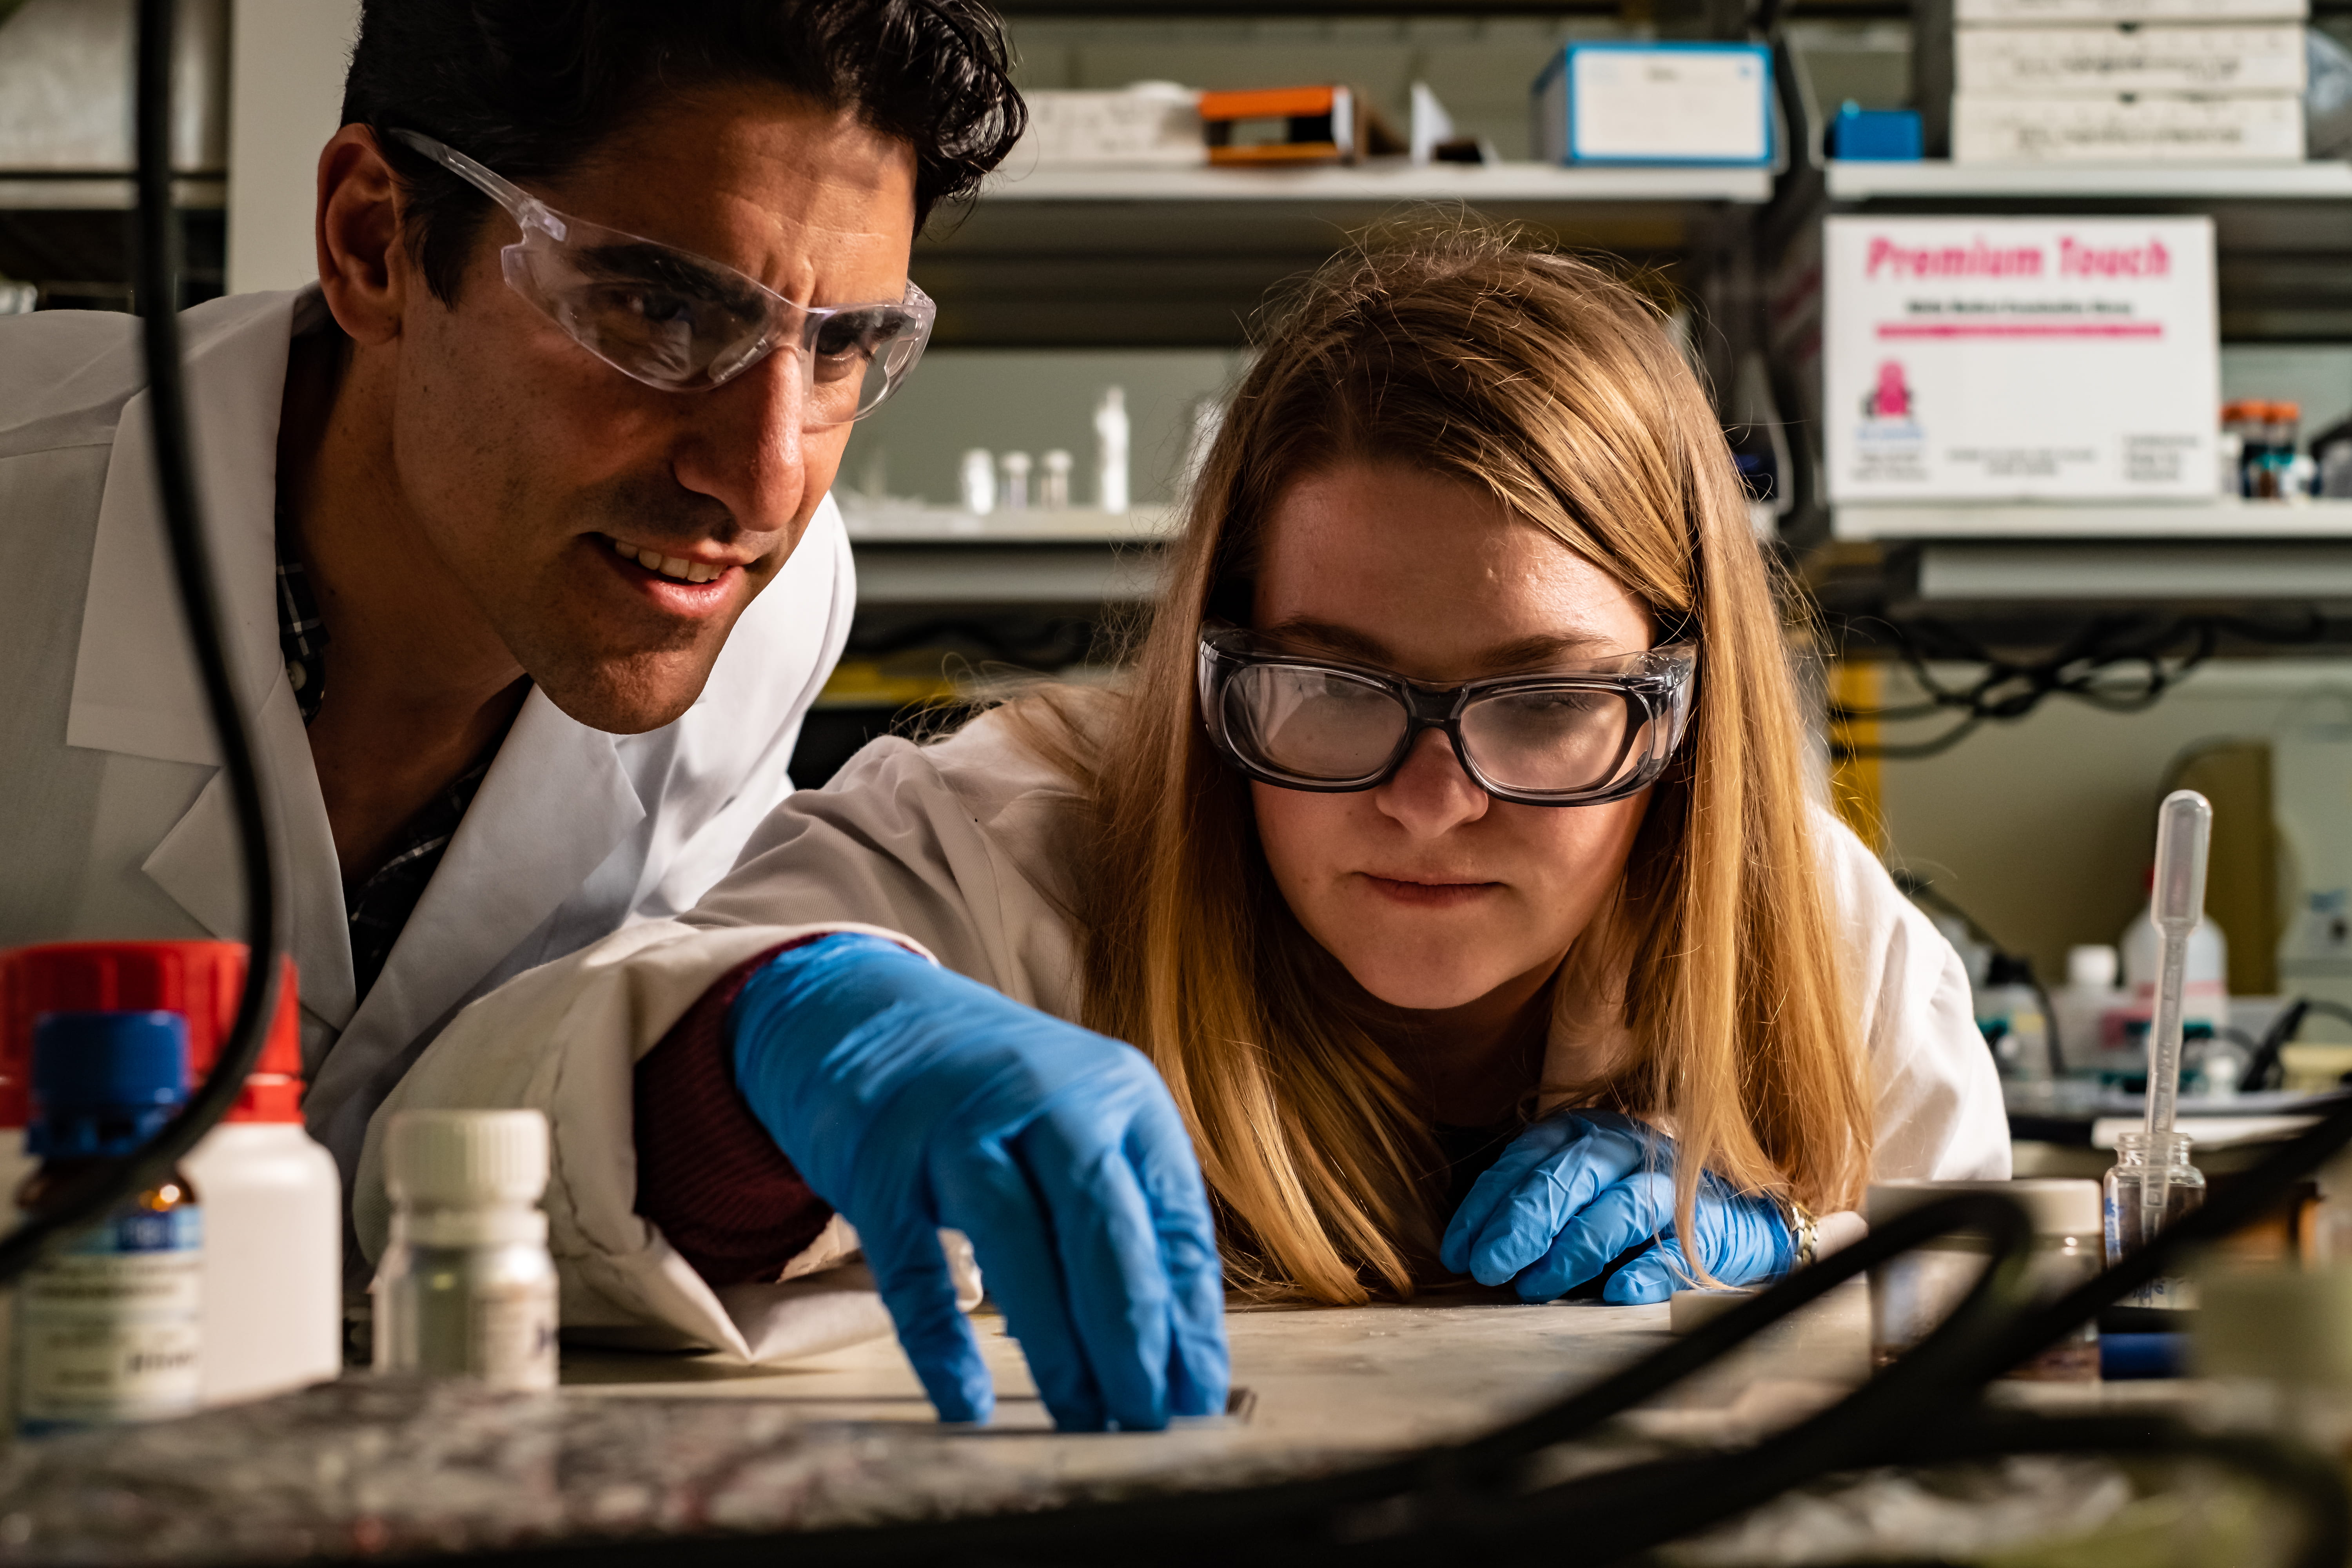 Rice engineer Rafael Verduzco and graduate student Morgan Barnes led the development of a method to 3D-print materials that morph from one shape to another through application of temperature, electric current or stress. Photo by Jeff Fitlow